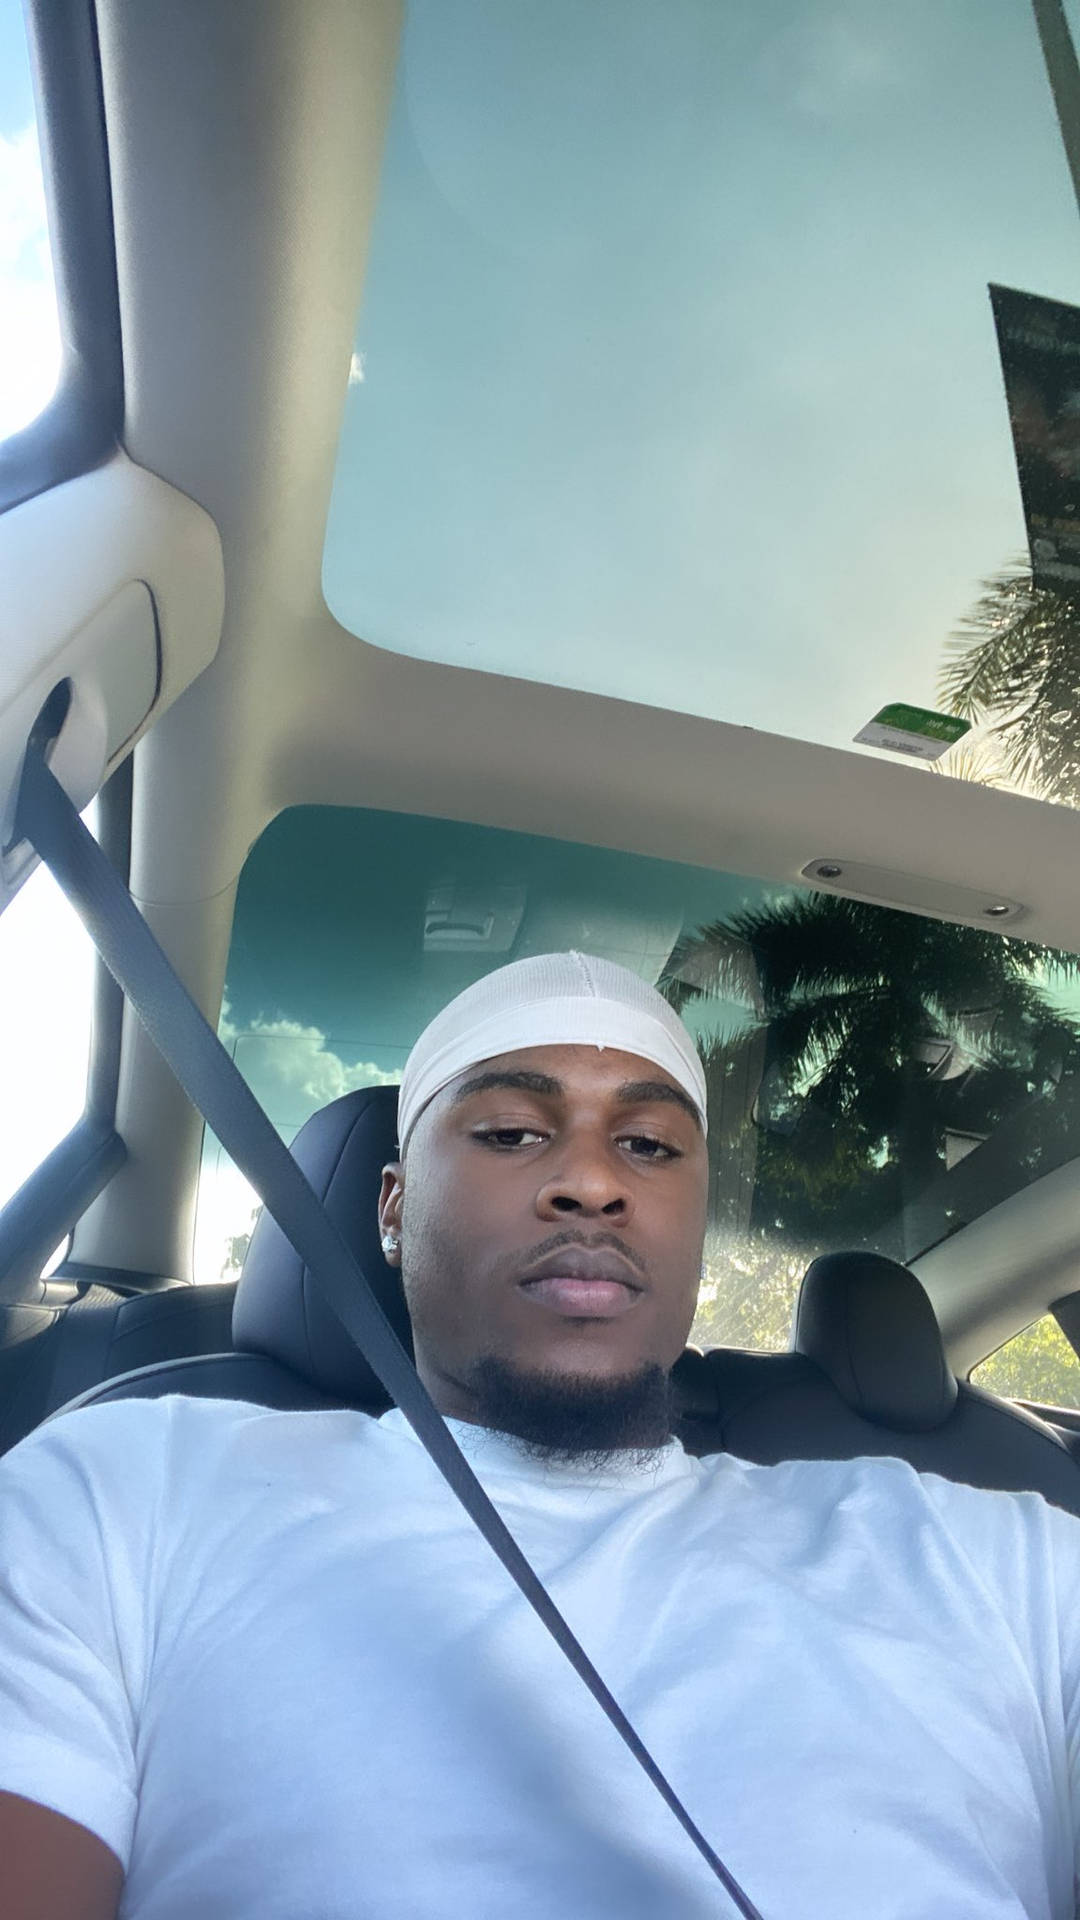 Caption: Instagram Star Swavy Lee Living The White-themed Luxury In A Car Selfie